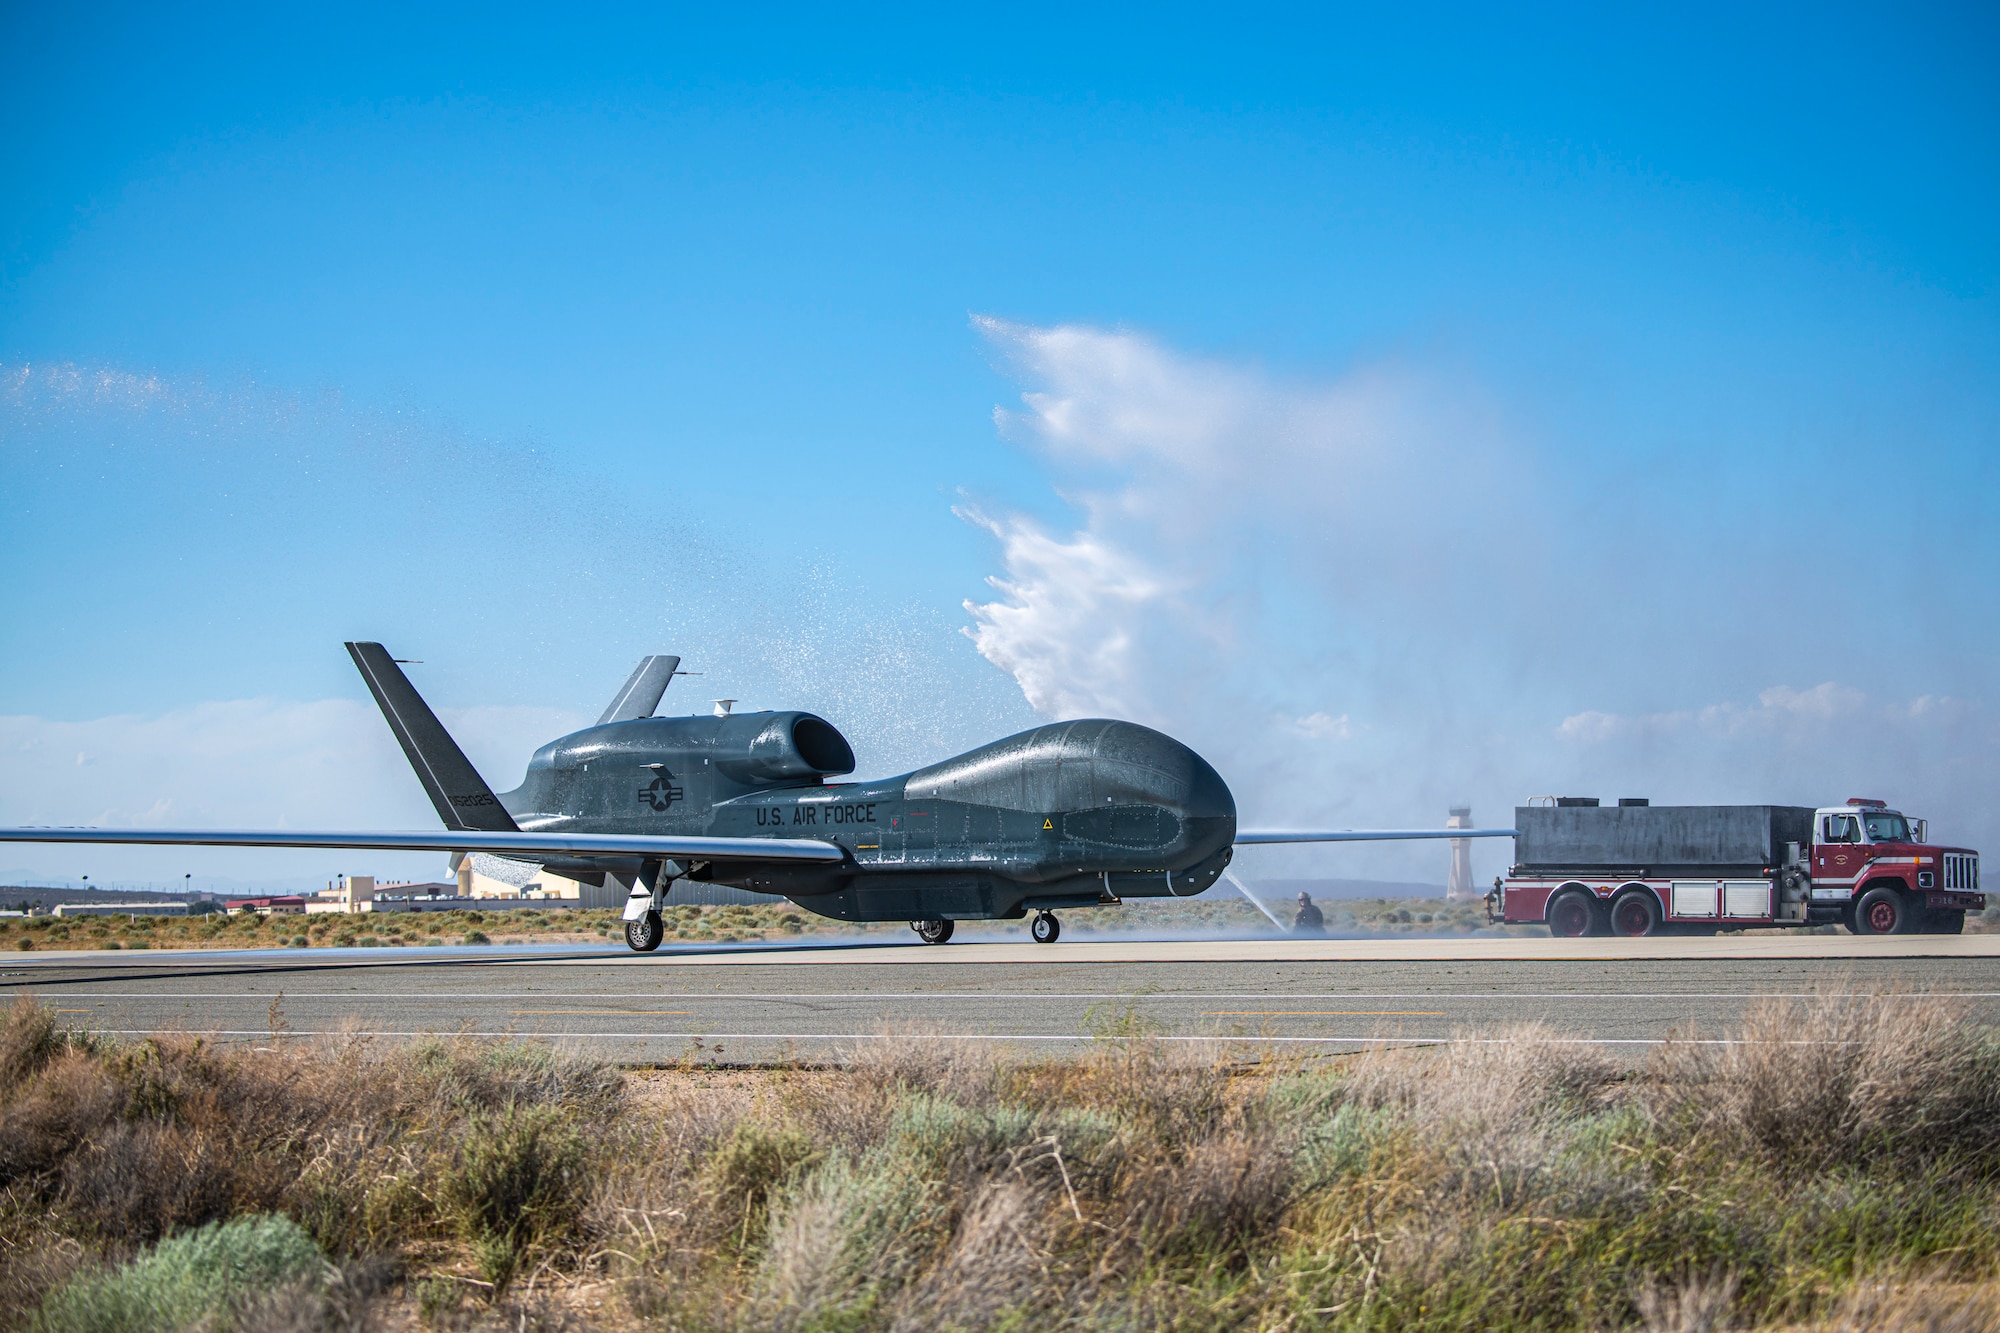 Fire trucks from the 812th Civil Engineer Squadron provide a water salute to an RQ-4 Global Hawk, assigned to and operated  by the 452nd Flight Test Squadron, at Edwards Air Force Base, California, May 23. The 452nd FLTS held a “sunsetting” event for the RQ-4 Global Hawk flight test program at Edwards AFB, June 9. The event marked the completion of the squadron’s test campaign for the aircraft. (Air Force photo by Giancarlo Casem)